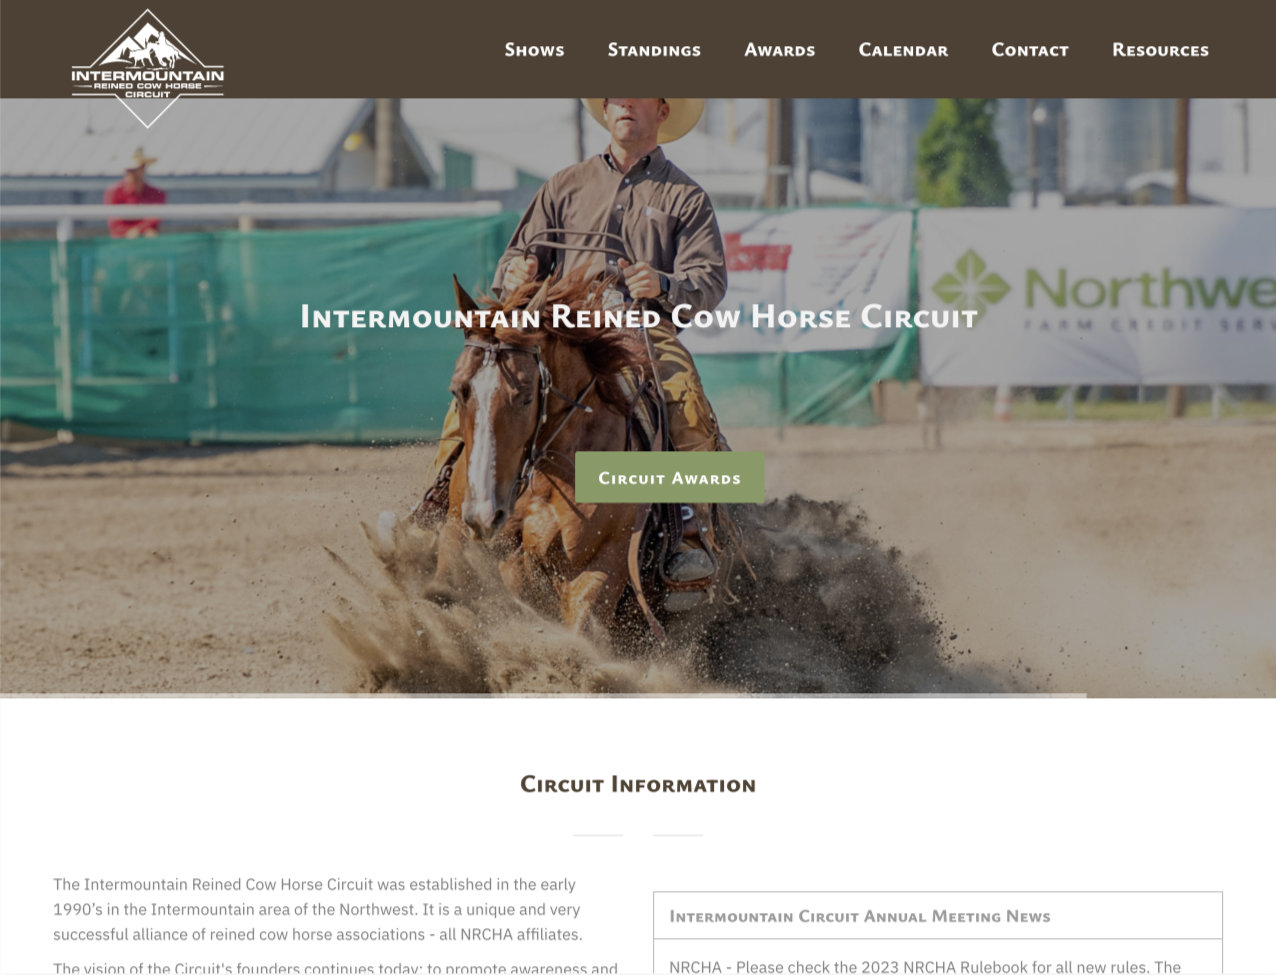 Intermountain Reined Cow Horse Circuit homepage